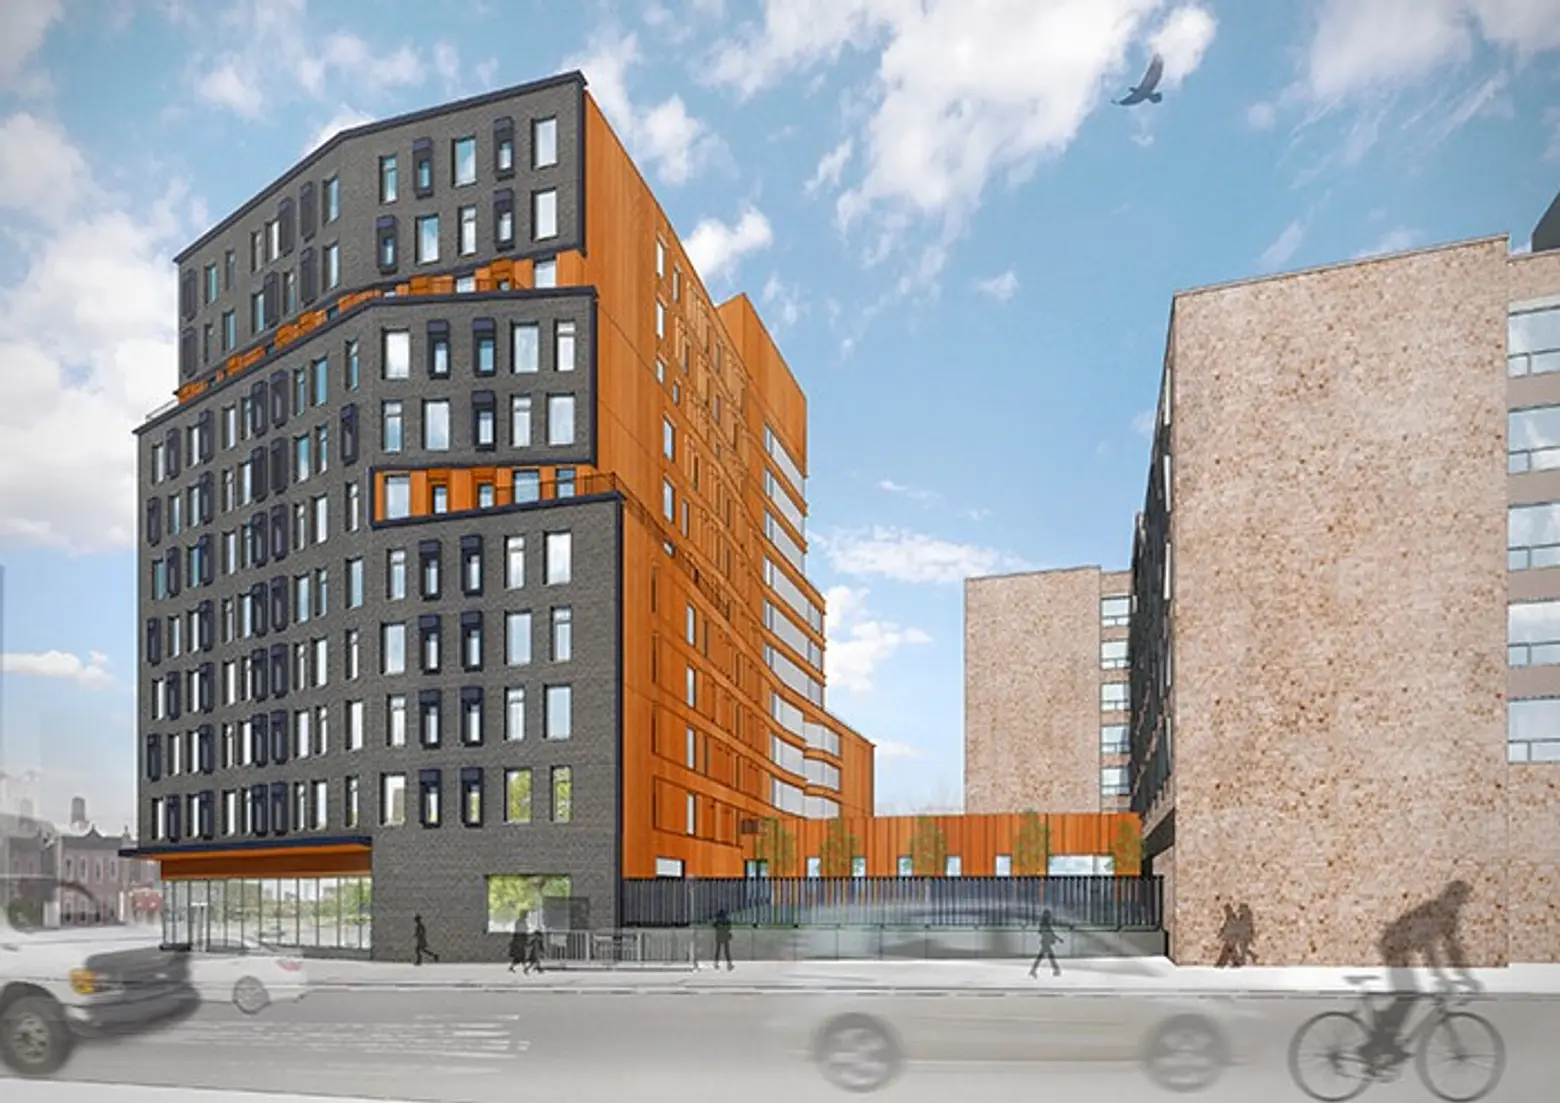 First Look at Tres Puentes Affordable Housing Development Planned For Mott Haven